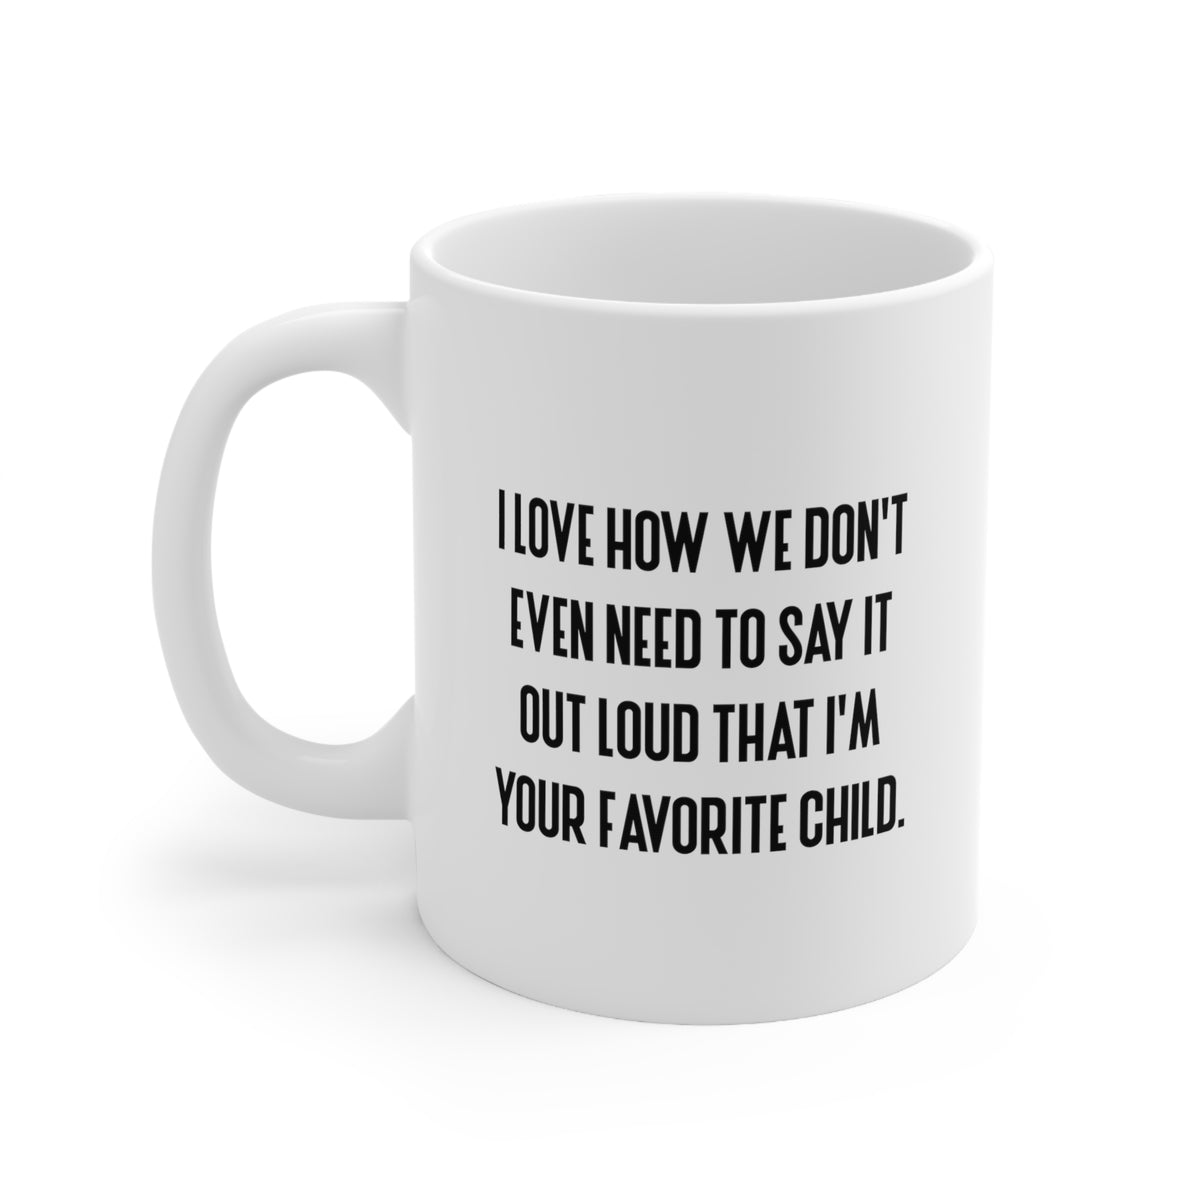 Funny Mother's Day Gifts Coffee Mug For Mom - I love how we don't even need to say it out loud - Best Birthday Gift From Daughter, Son